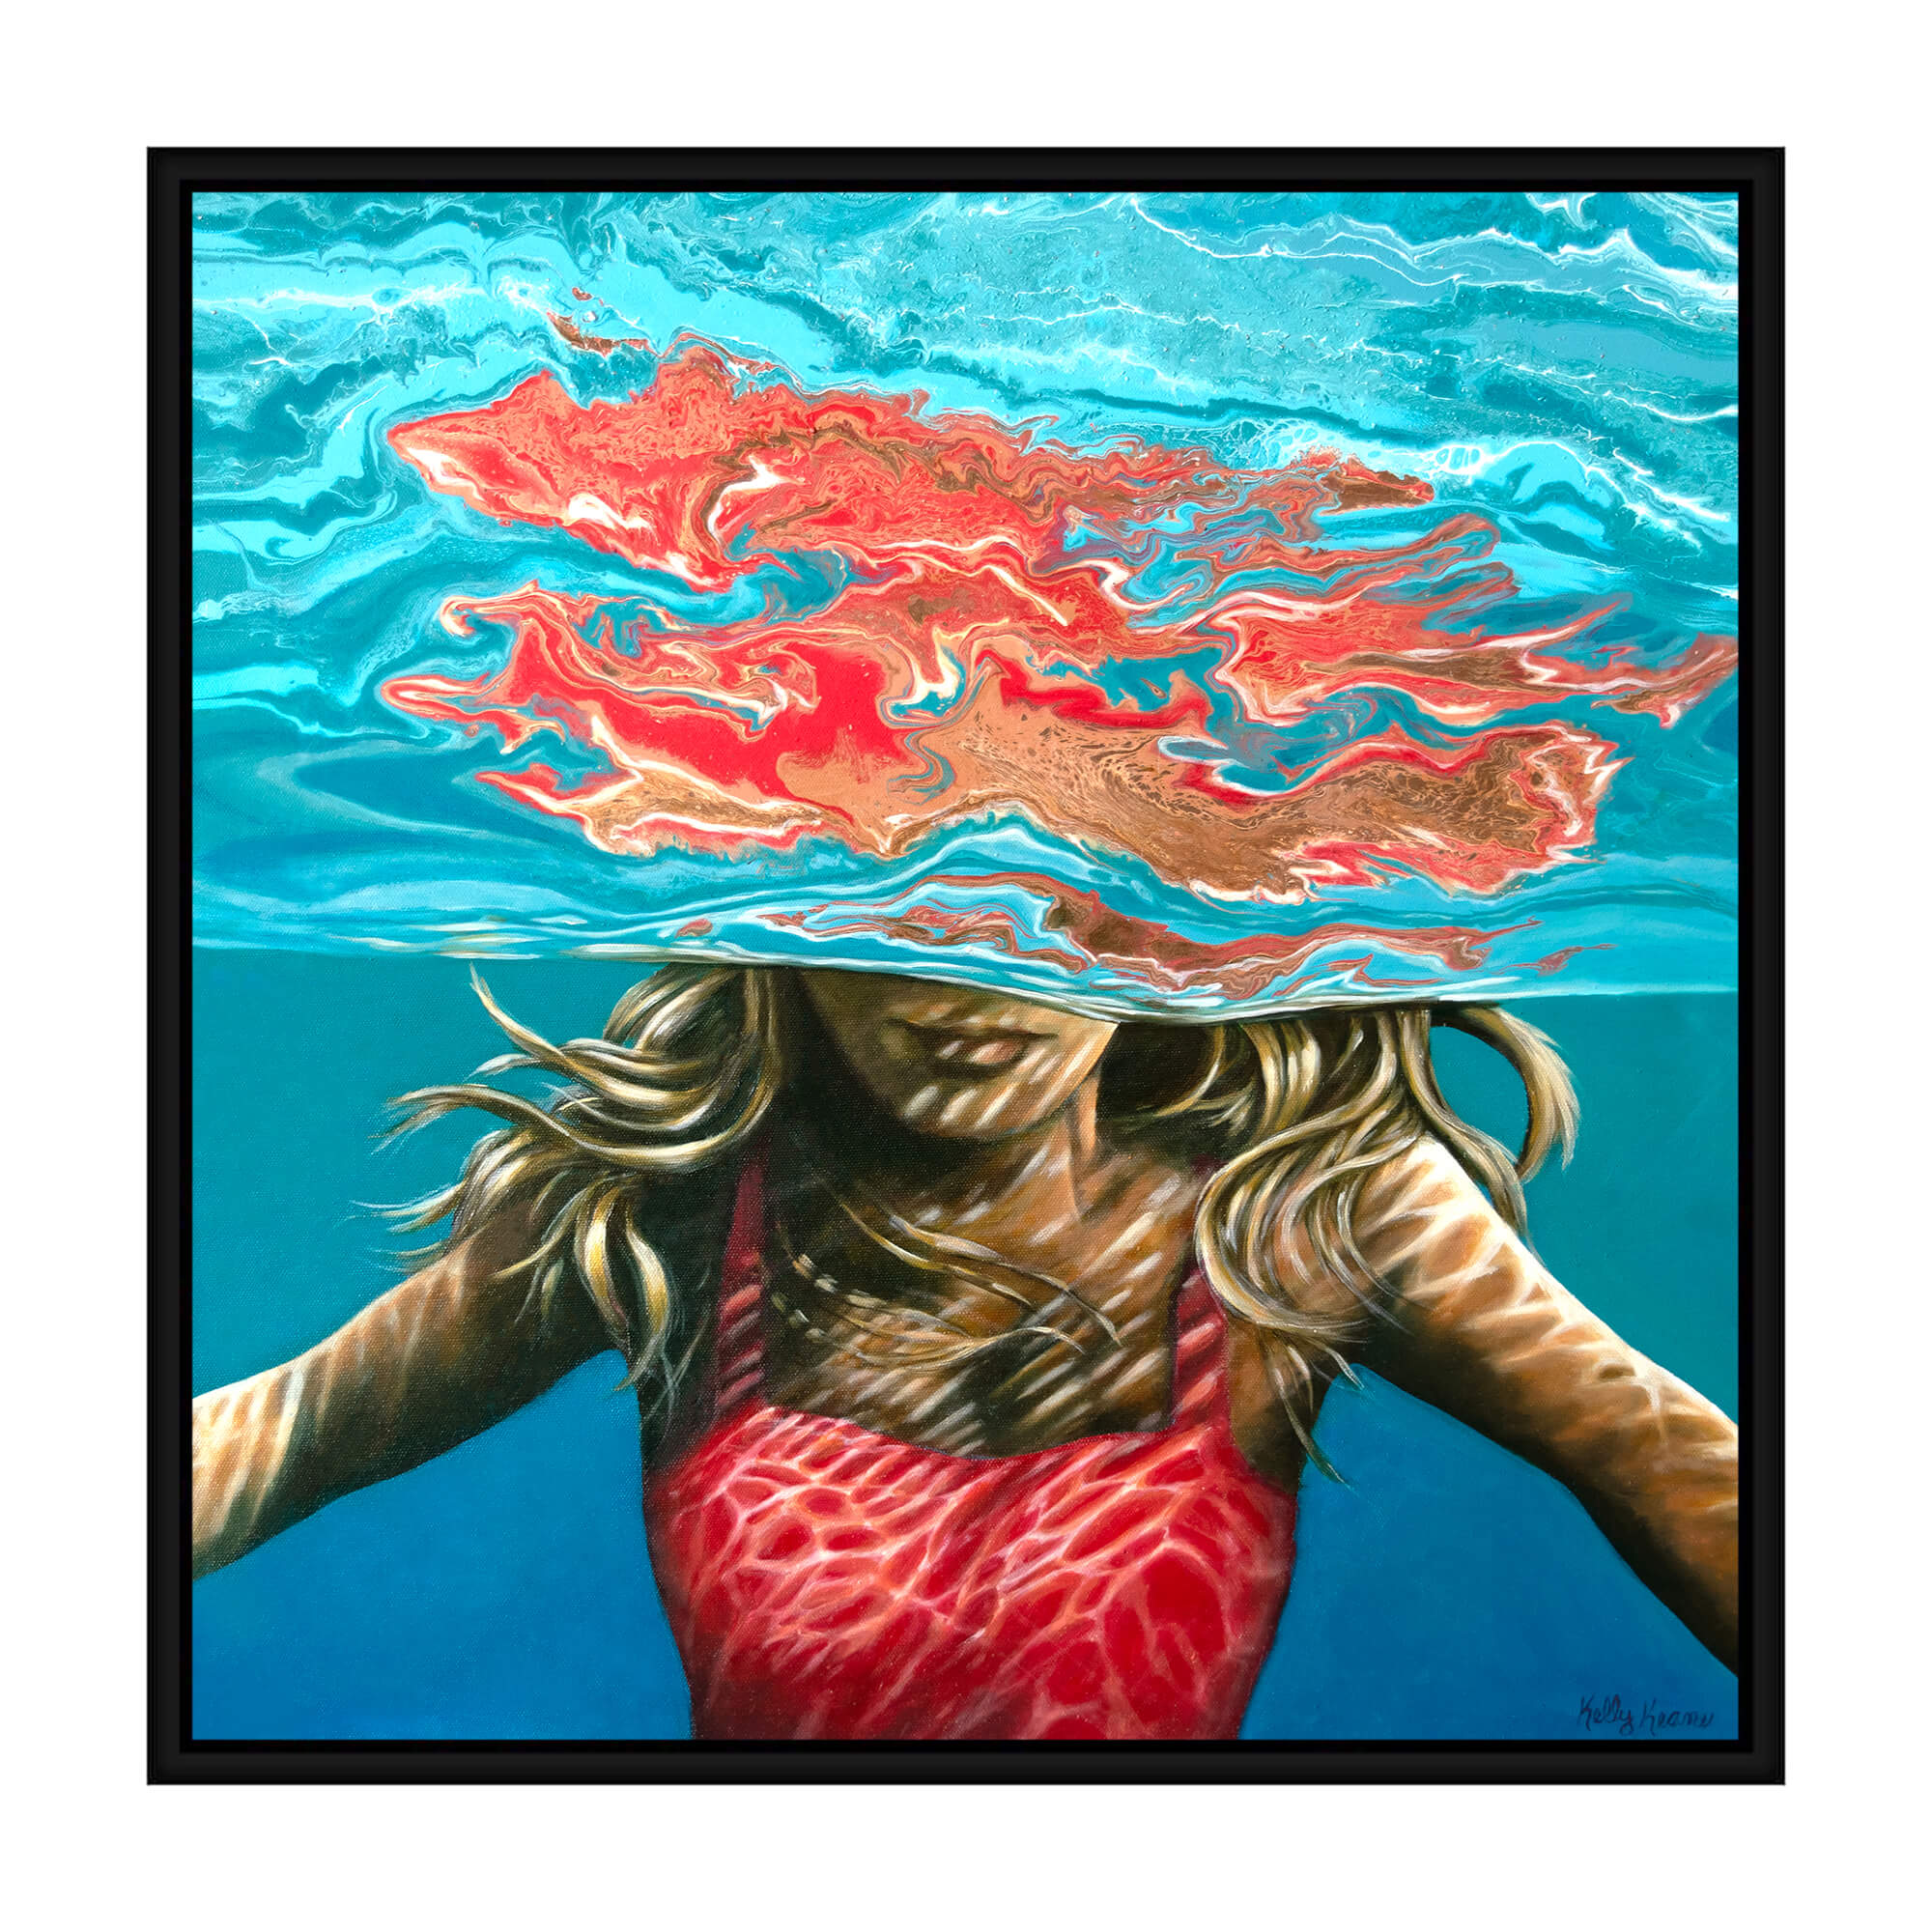 A canvas with black frame depicting a woman wearing a pink top  by hawaii artist Kelly Keane